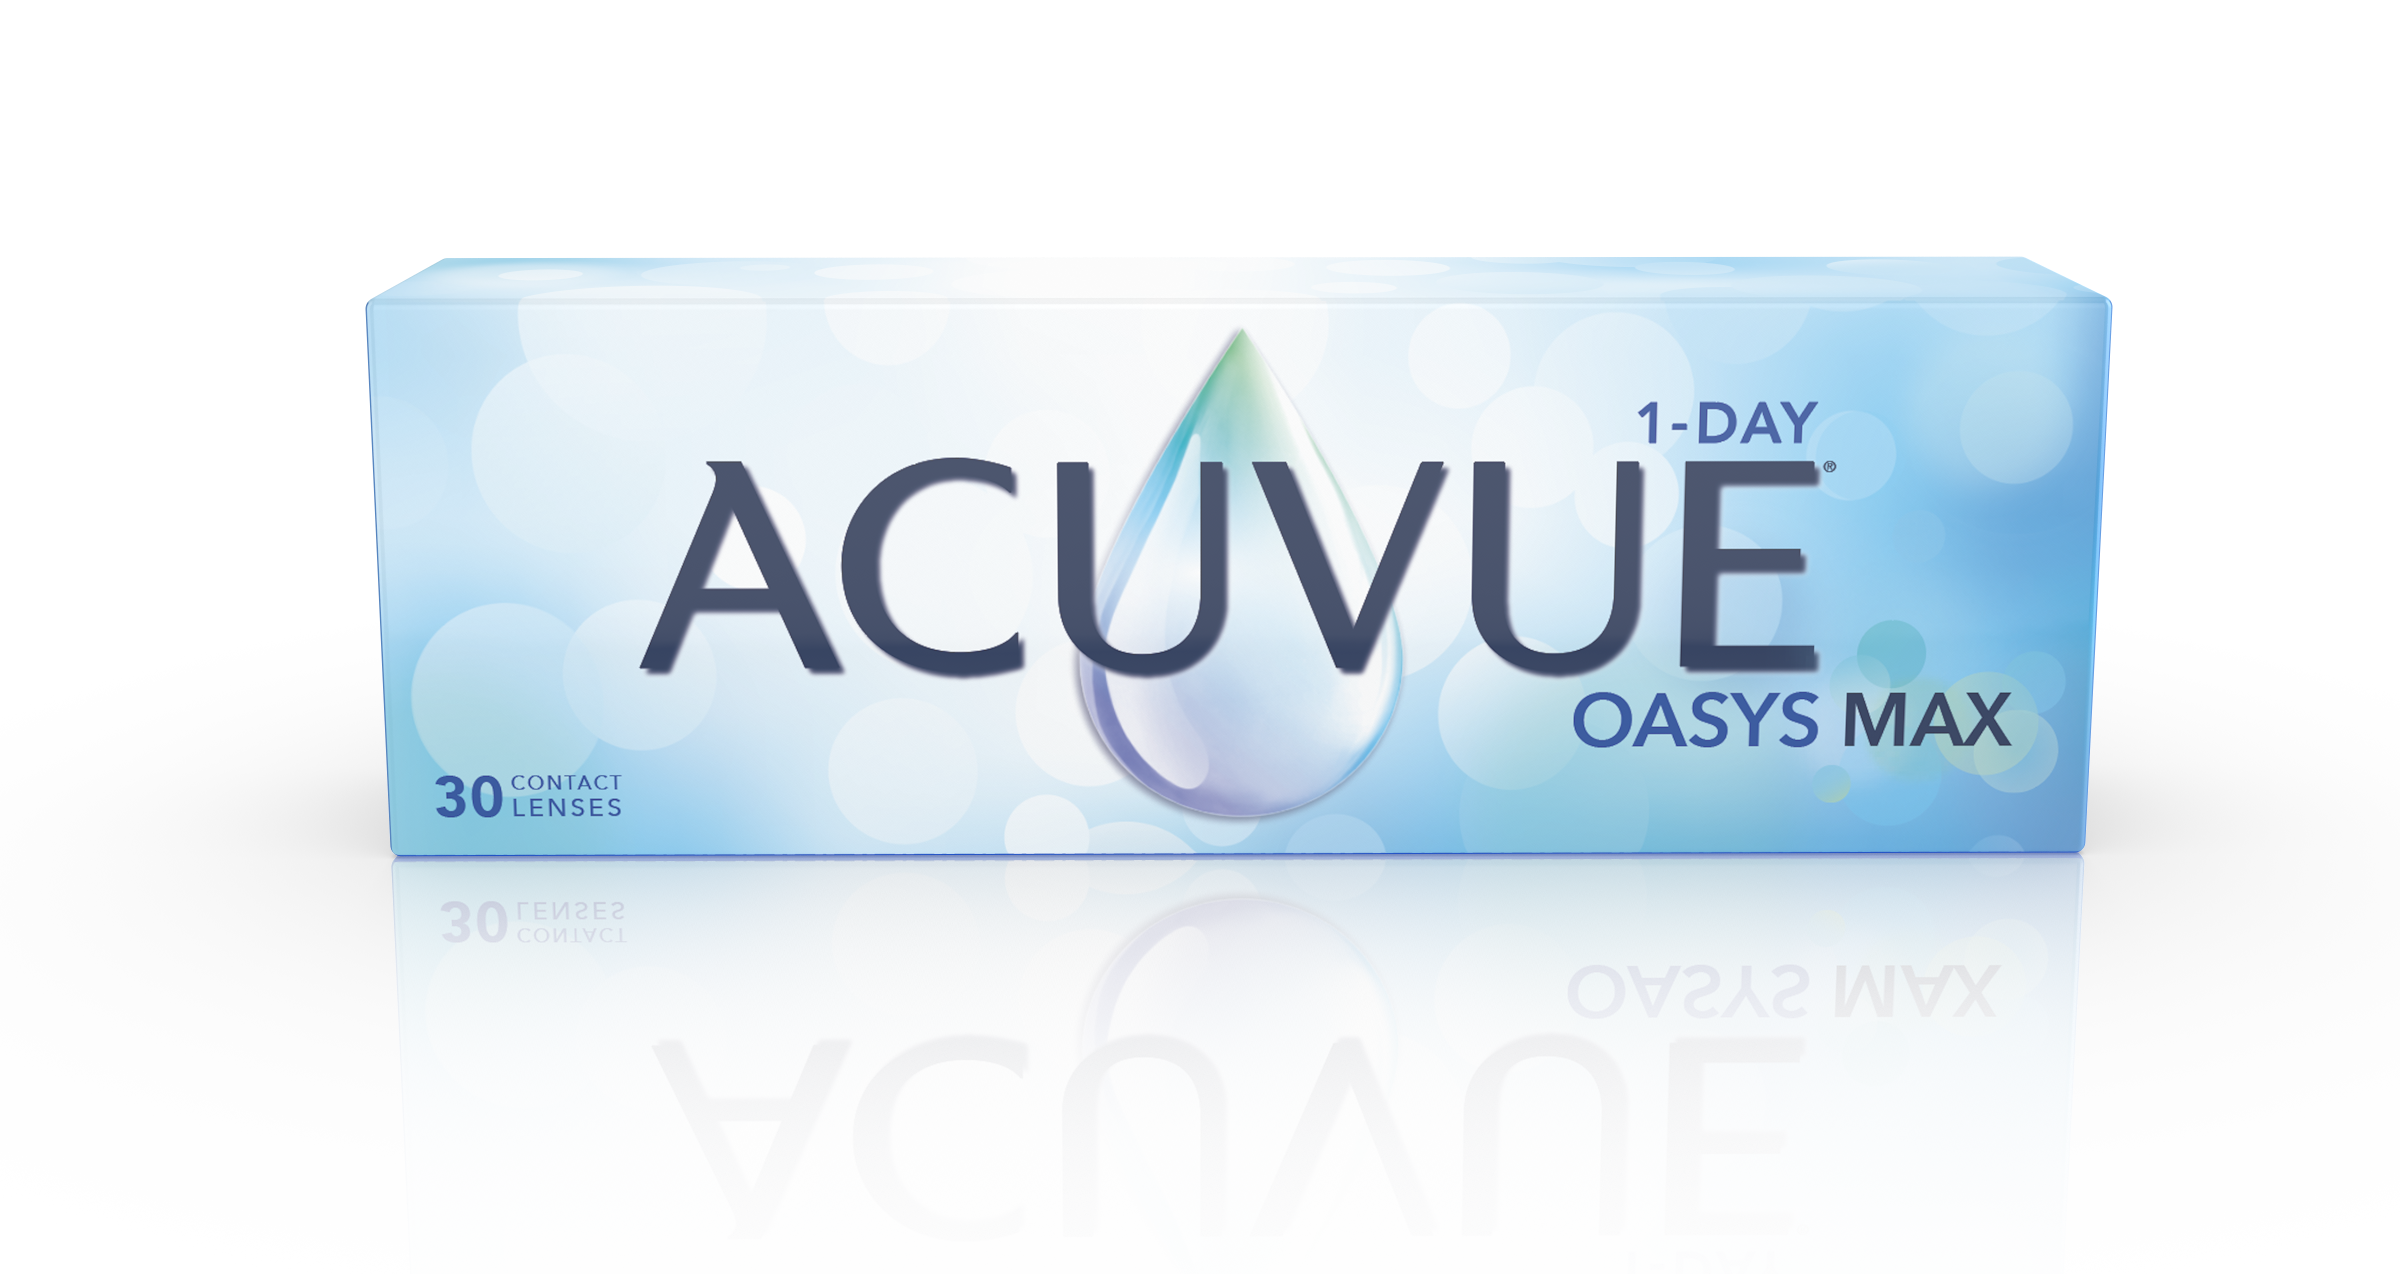 ACUVUE OASYS MAX 1 DAY (30 PACK)